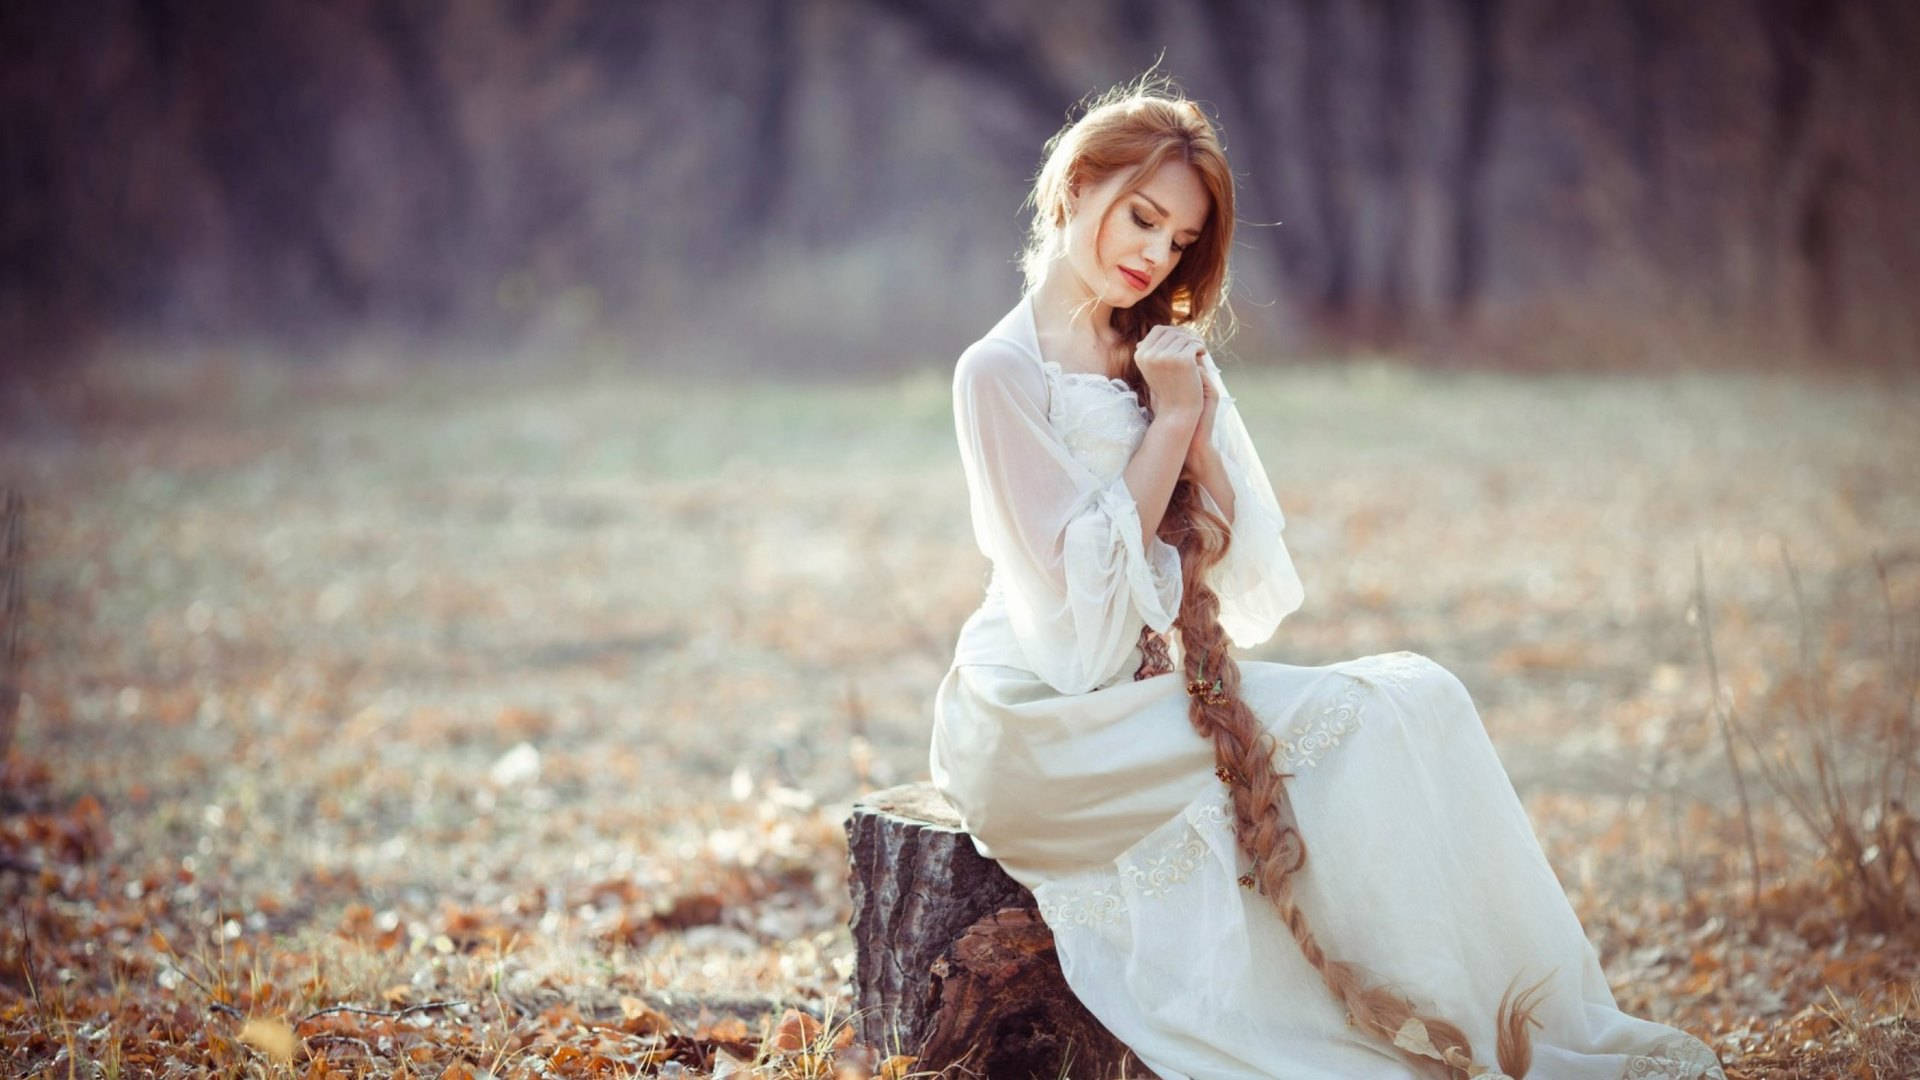 Elegant Lady Alone In The Woods Background